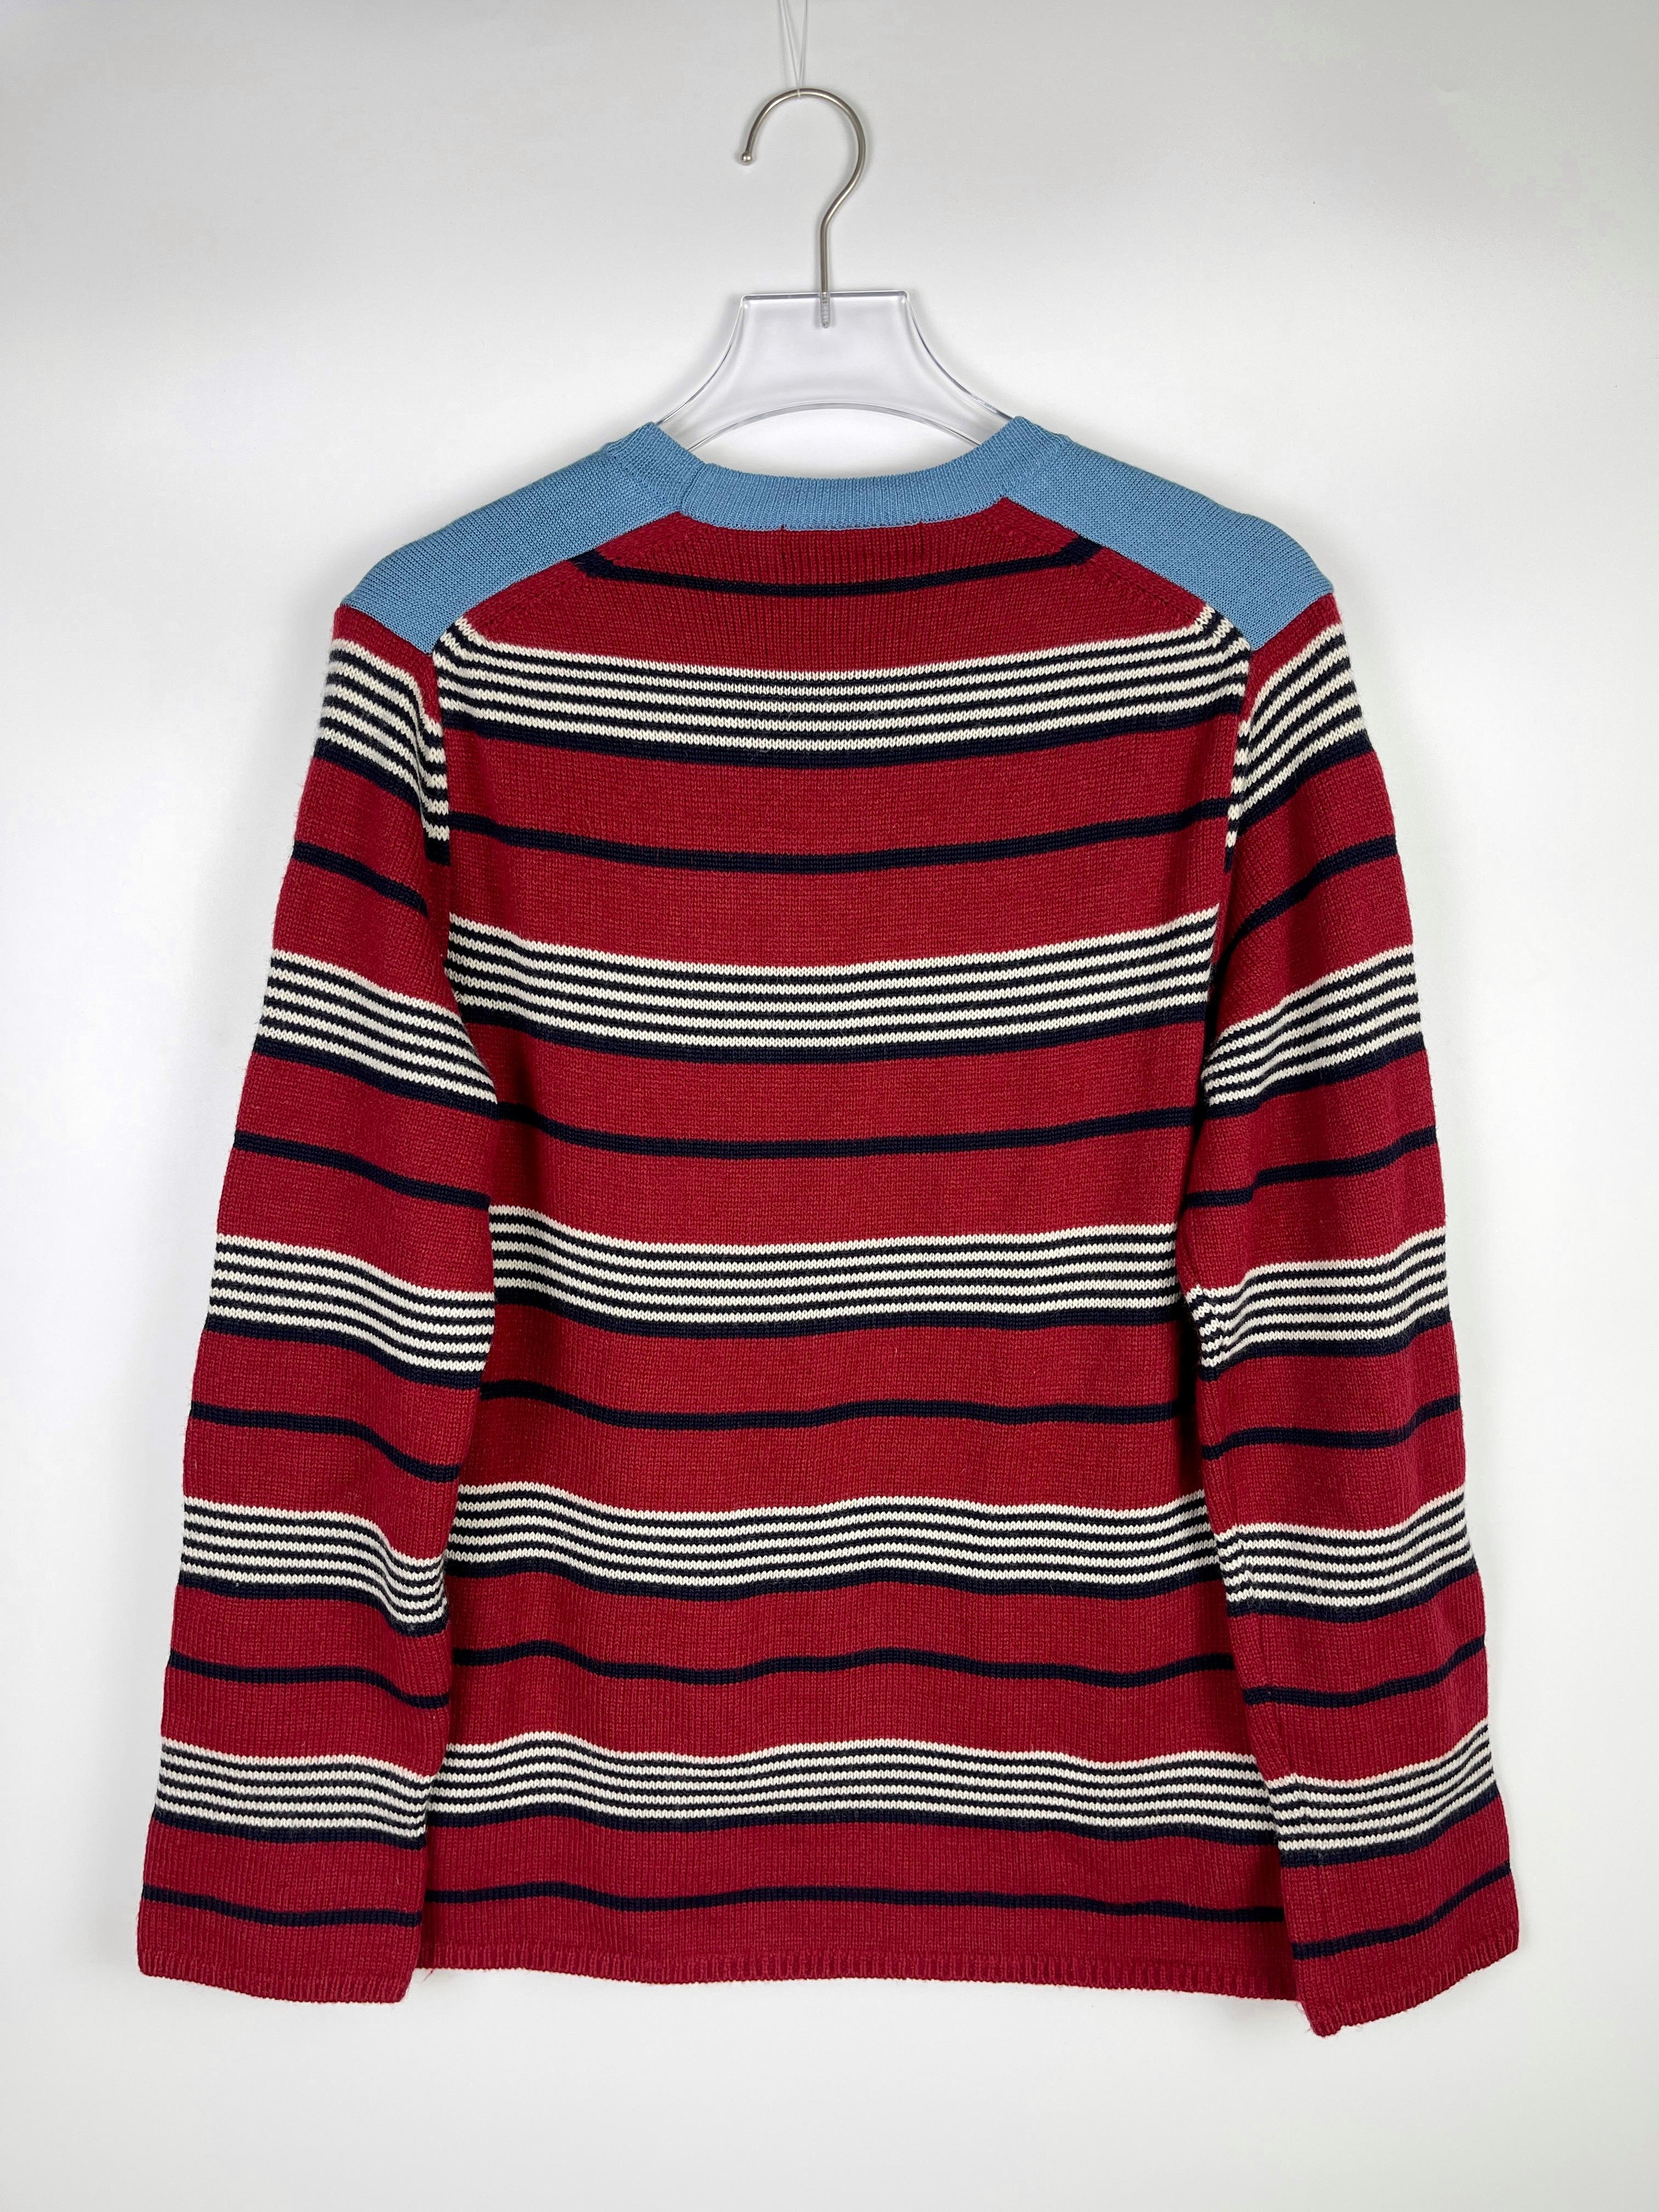 Comme des Garcons Homme Deux A/W2012 Abstract Cavalier Sweater  In Excellent Condition For Sale In Seattle, WA